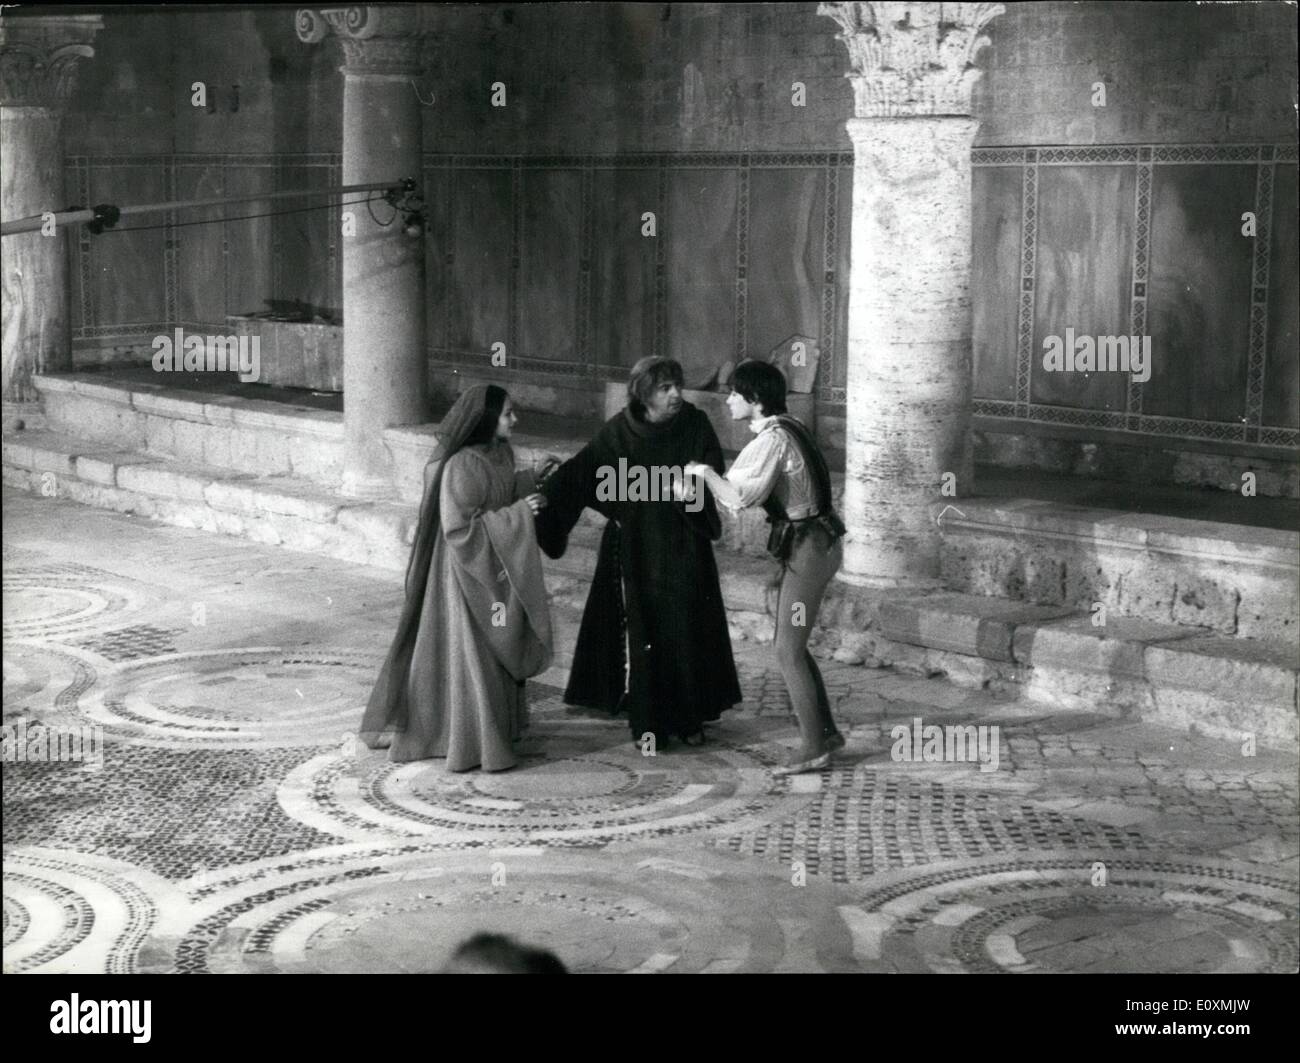 Jun. 06, 1967 - Tuscania, June 1967 - The wedding of ''Rome and Juliet was the scene sent in World vision this night filmed in the Church of Tuscania, in the middle of the Estruscan area This was also the firs scene of the film directed by France Zepfirelli who chose the actors for the film after the examination of 300 actors or candidates They were Leonard Whiting, 17, from Eornsey, London and Olivia Hussey, 15 from Buenos Ayres Stock Photo